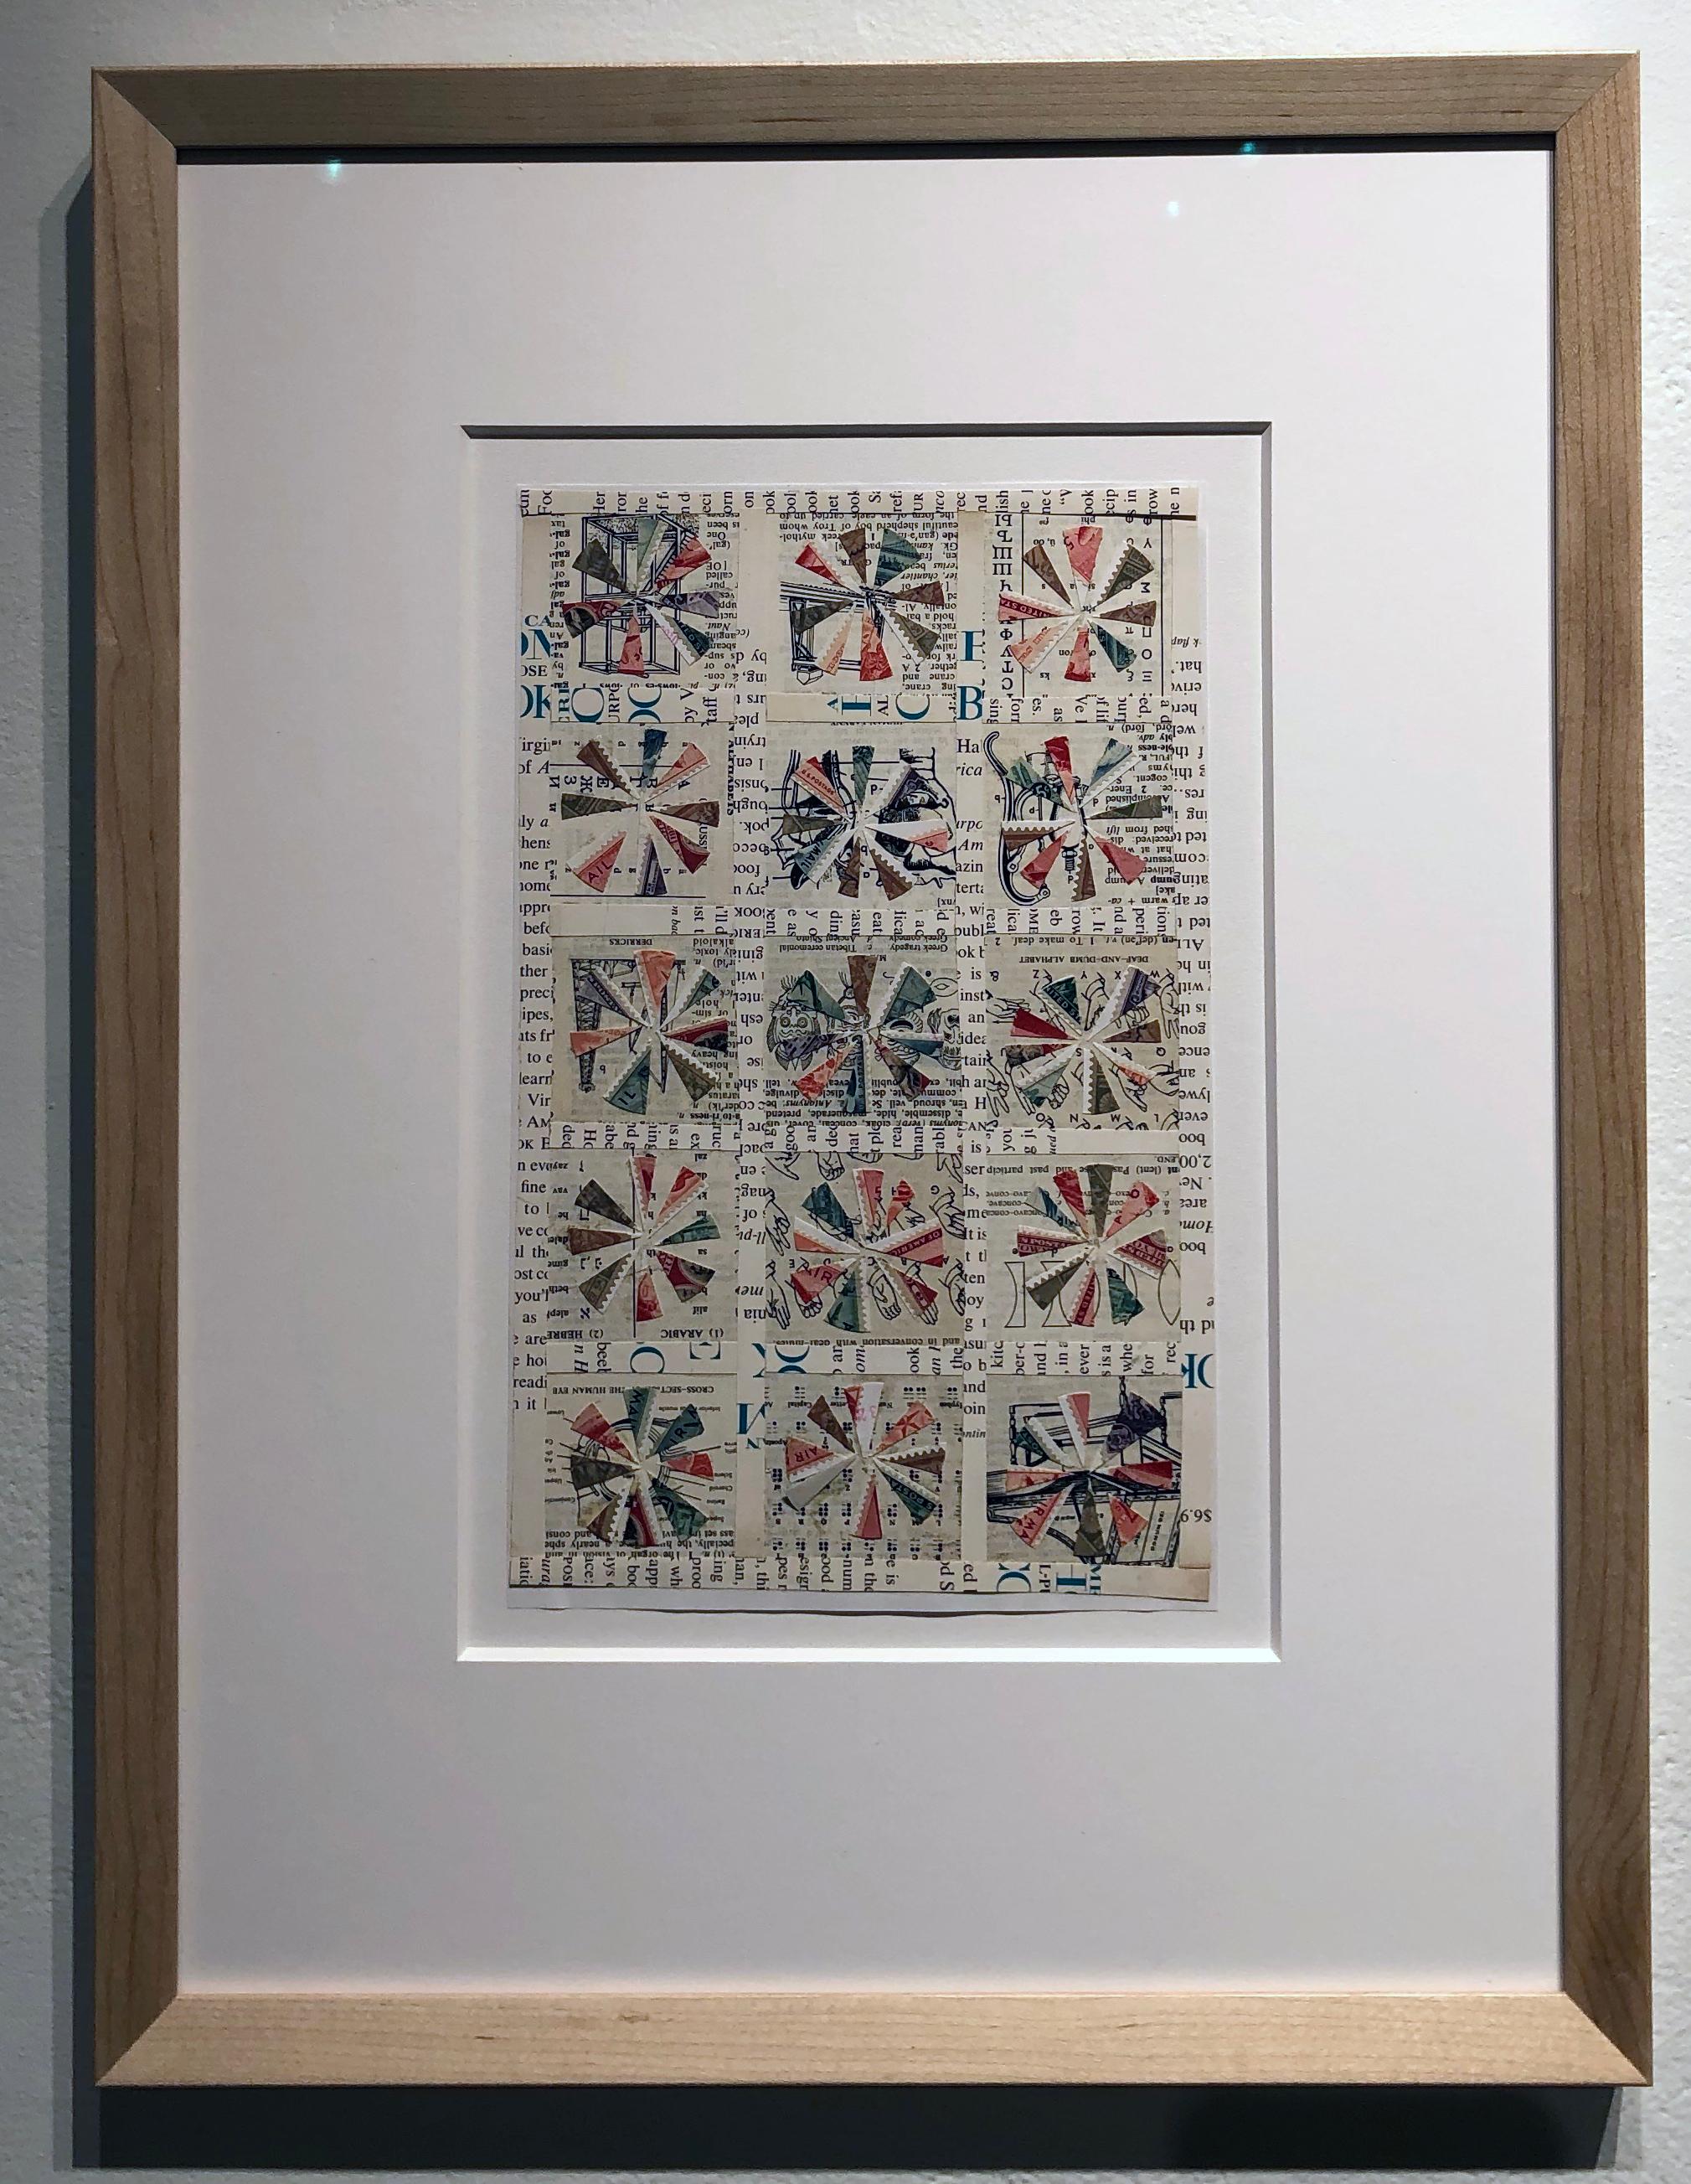 Quilt Pattern Study, Graphic Collage, Vintage Postage Stamps, Matted, Framed - Painting by Jim Rose